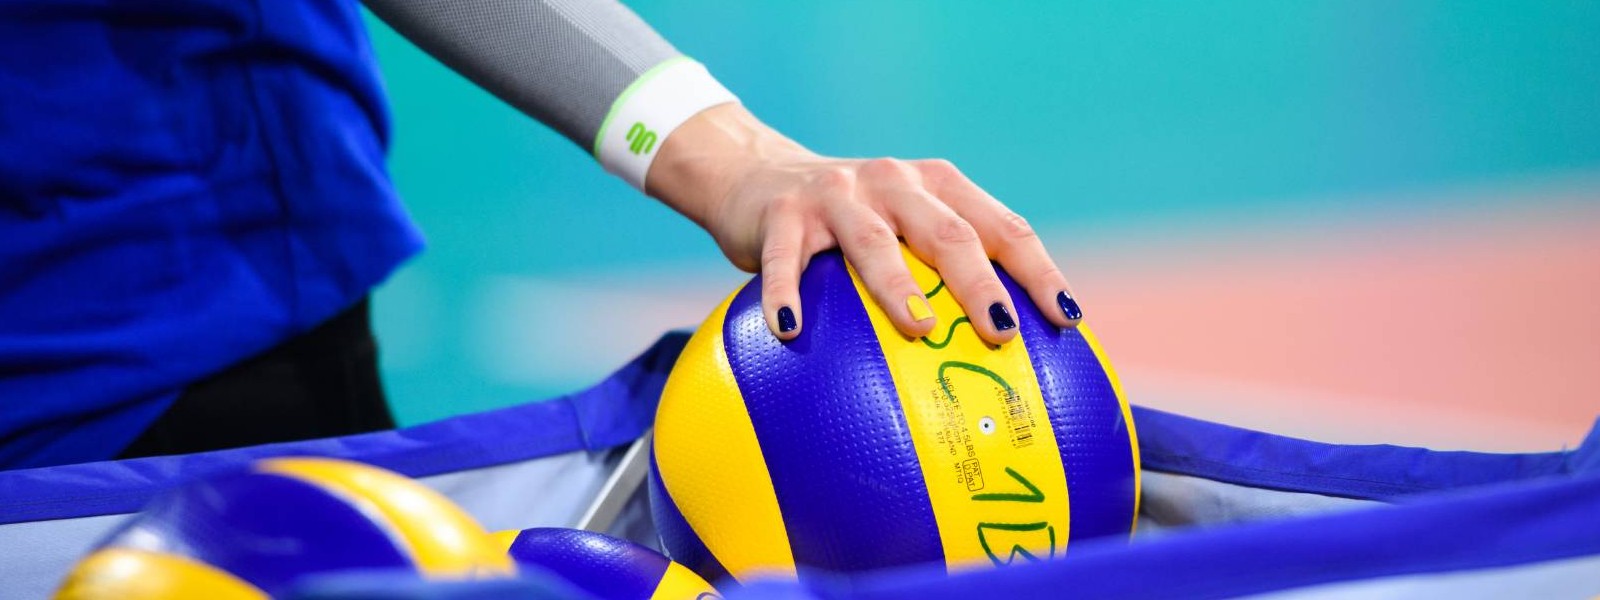 Volleyball player with white arm Sleeves grabs a volleyball